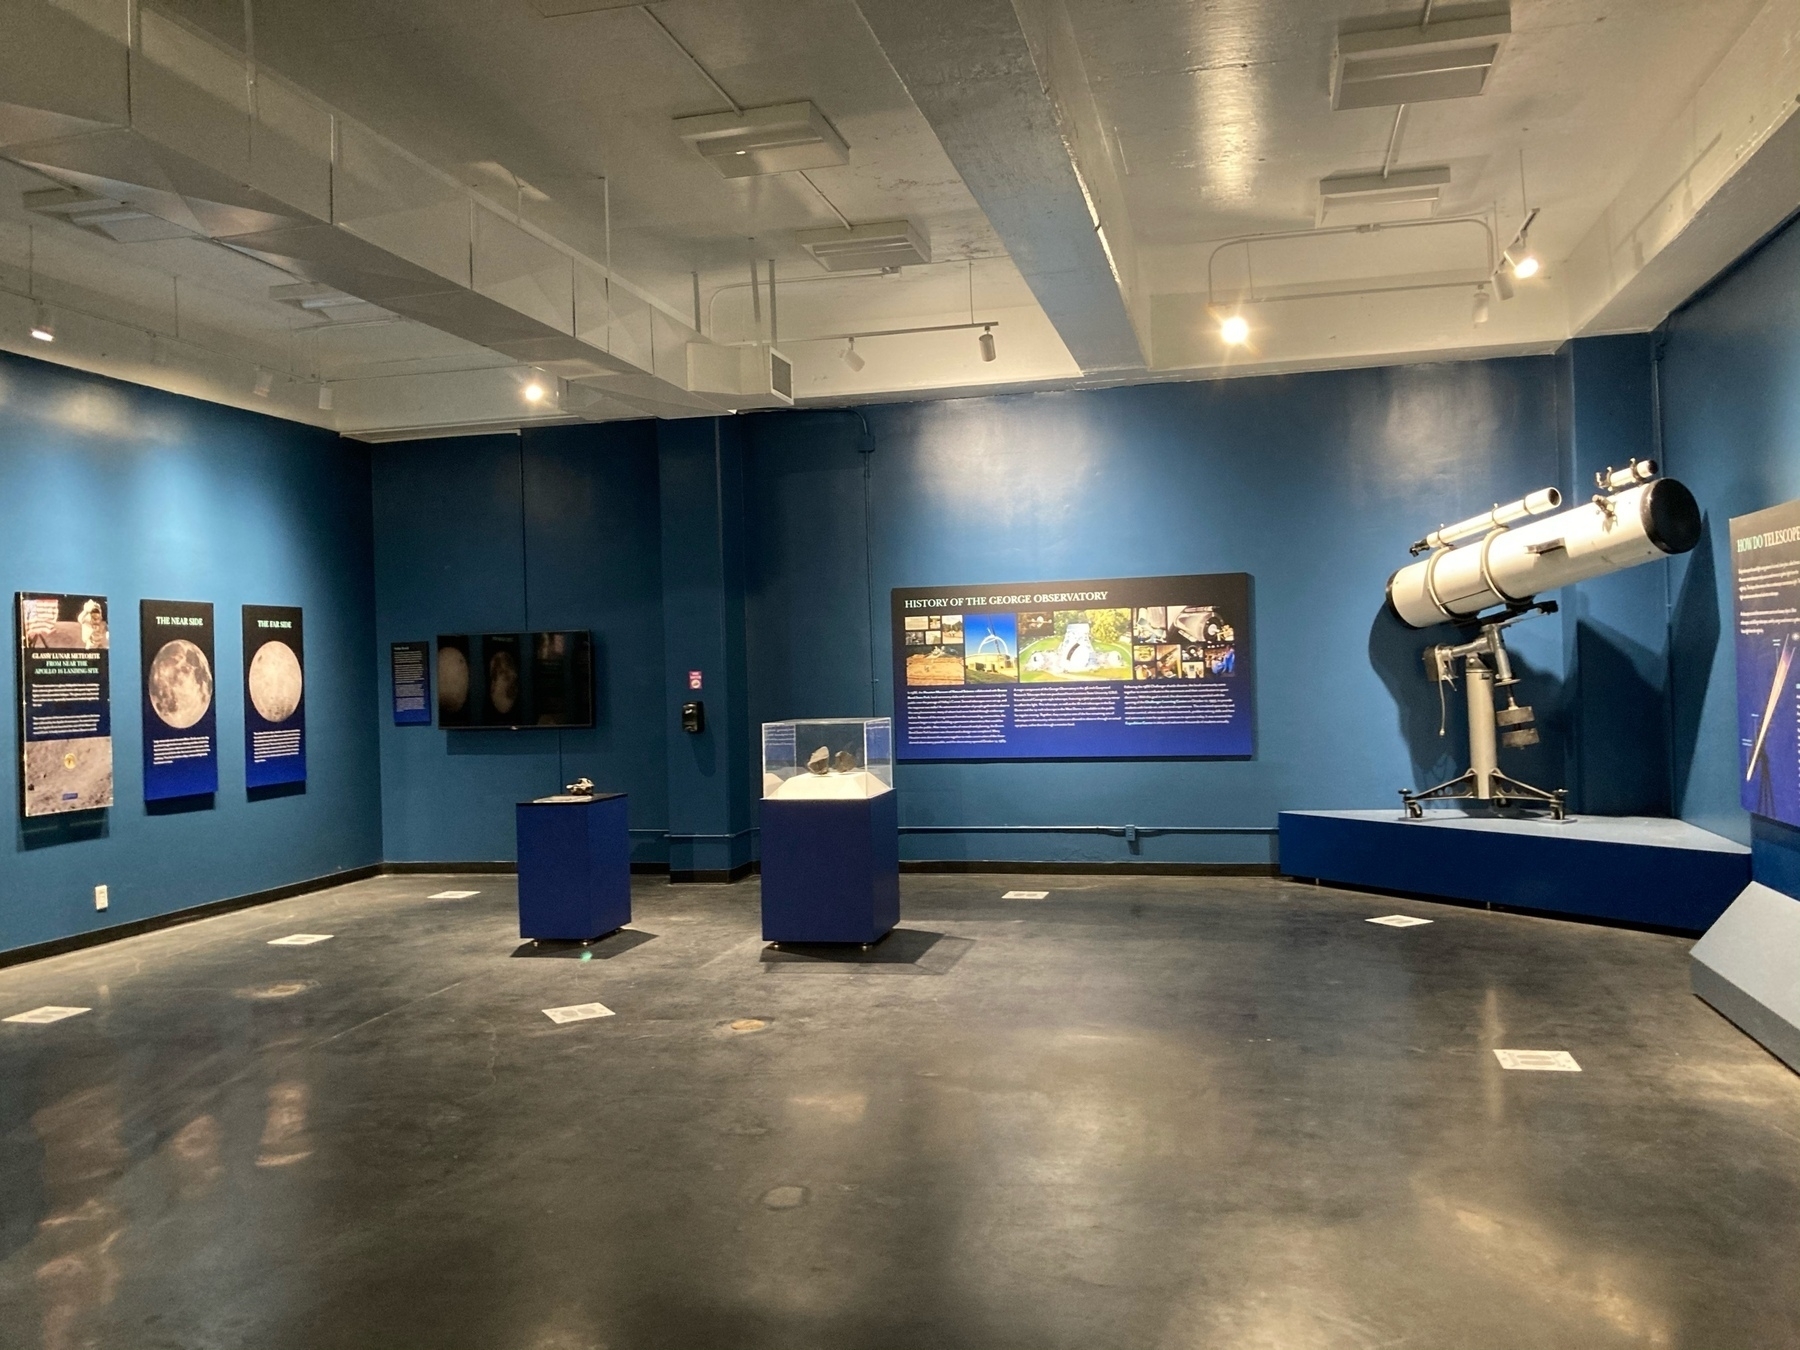 Room with telescopes and items on display